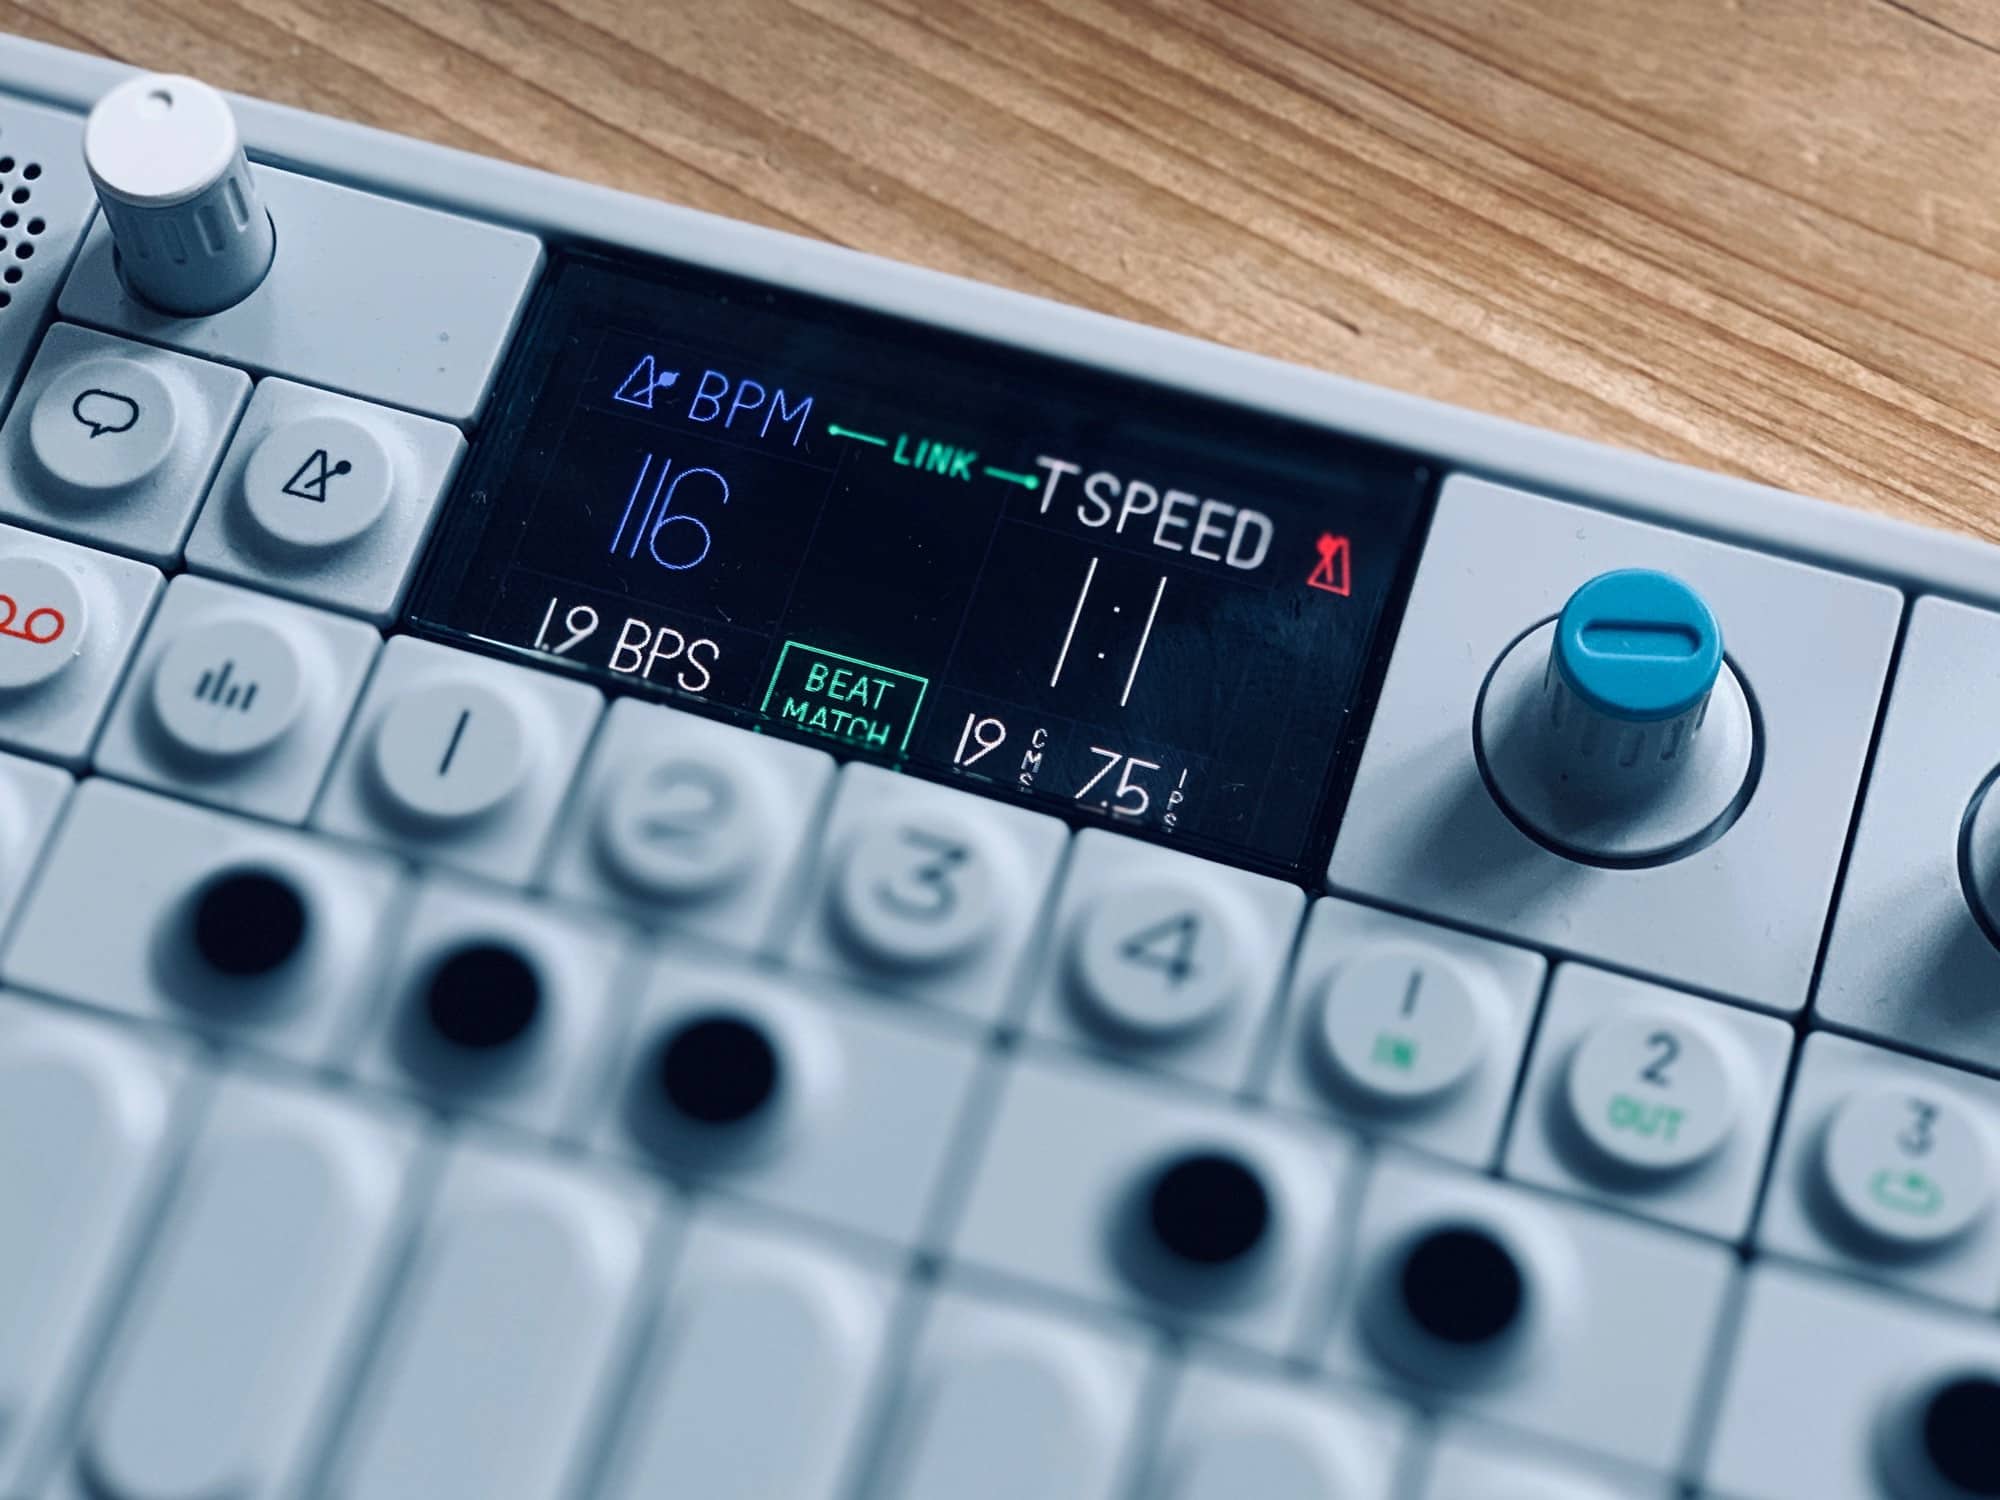 In the OP-1’s metronome screen, twist the green knob until you see BEAT MATCH and LINK.